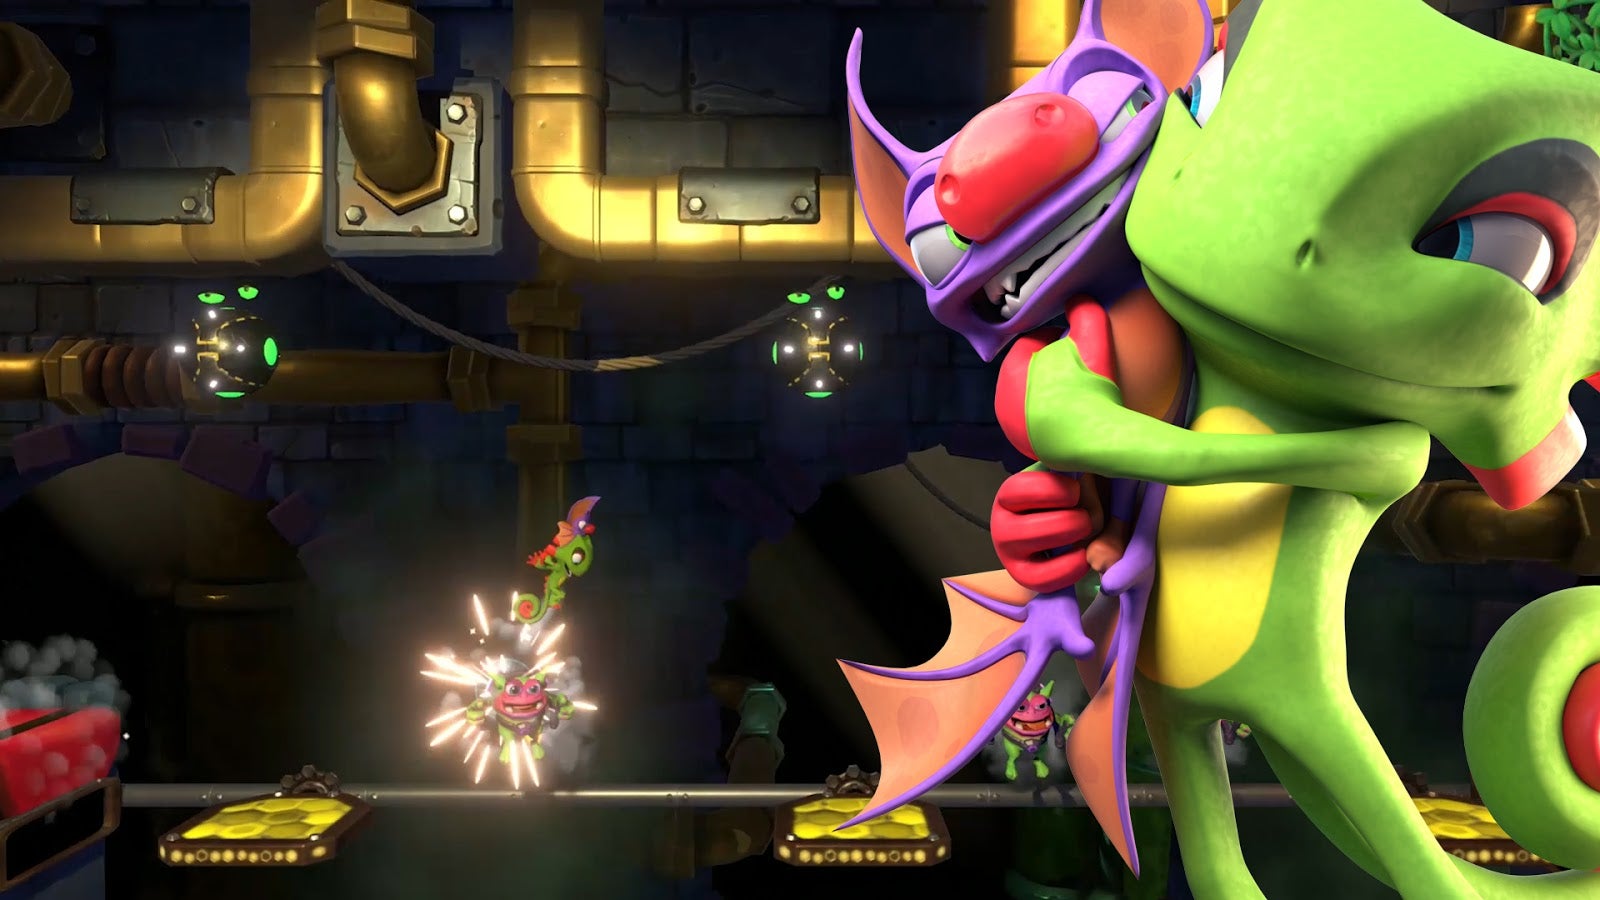 The New Yooka-Laylee Feels Like A Remake Of A Classic Game